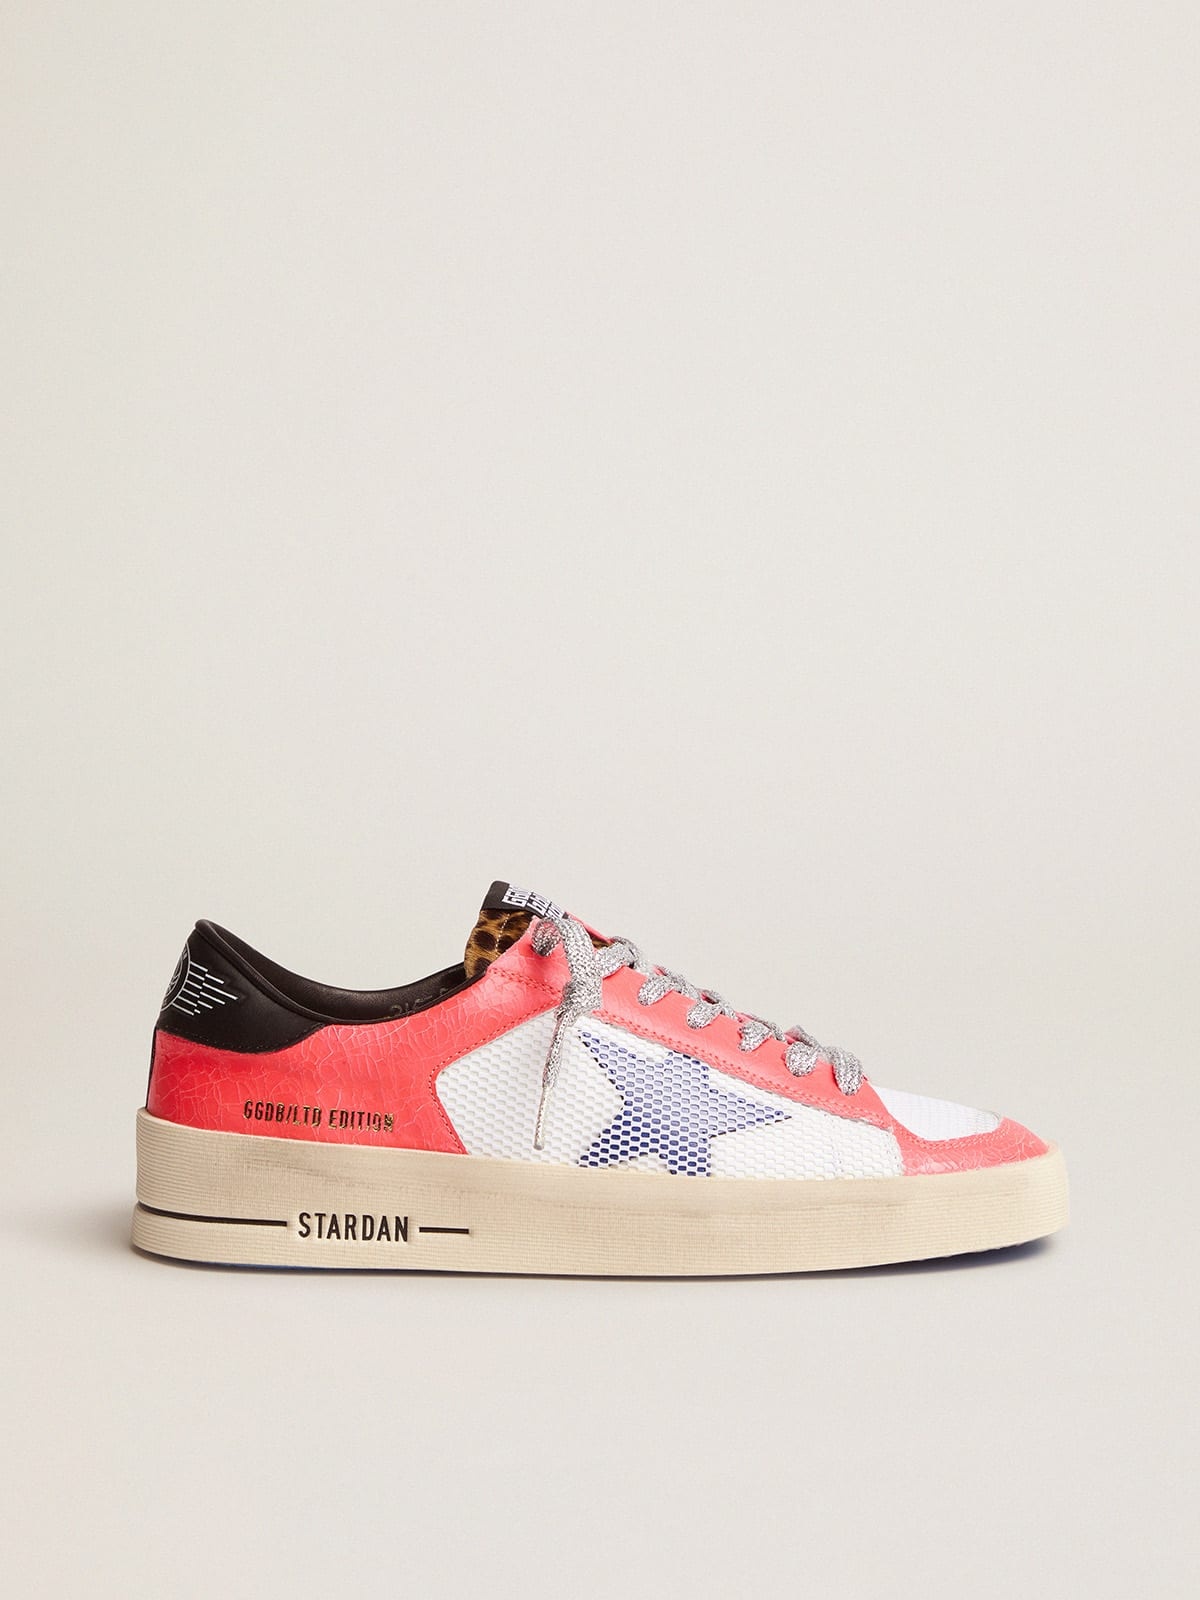 Golden Goose Women\'s LAB Limited Edition Stardan sneakers in craquelé  leather and pony skin | REVERSIBLE